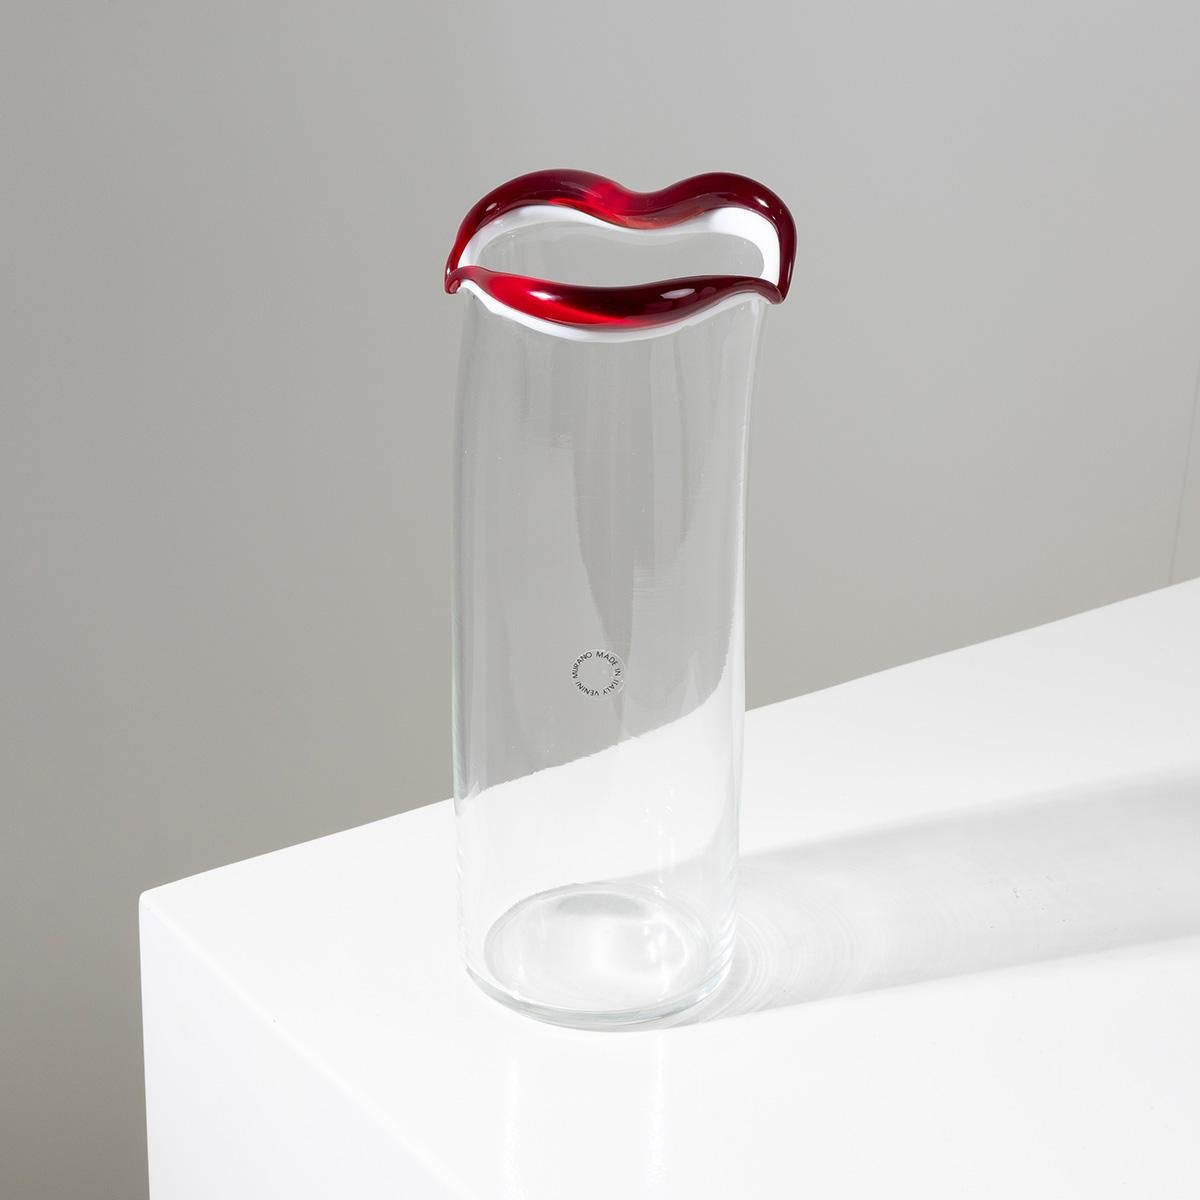 Sorriso is the result of the last series of vases designed by Fulvio Bianconi for Venini at the end of the 80s.
It is a mouth-blown glass vase, on which is applied a milk-white smile with red lips.
The body of the vase is itself made of crystal